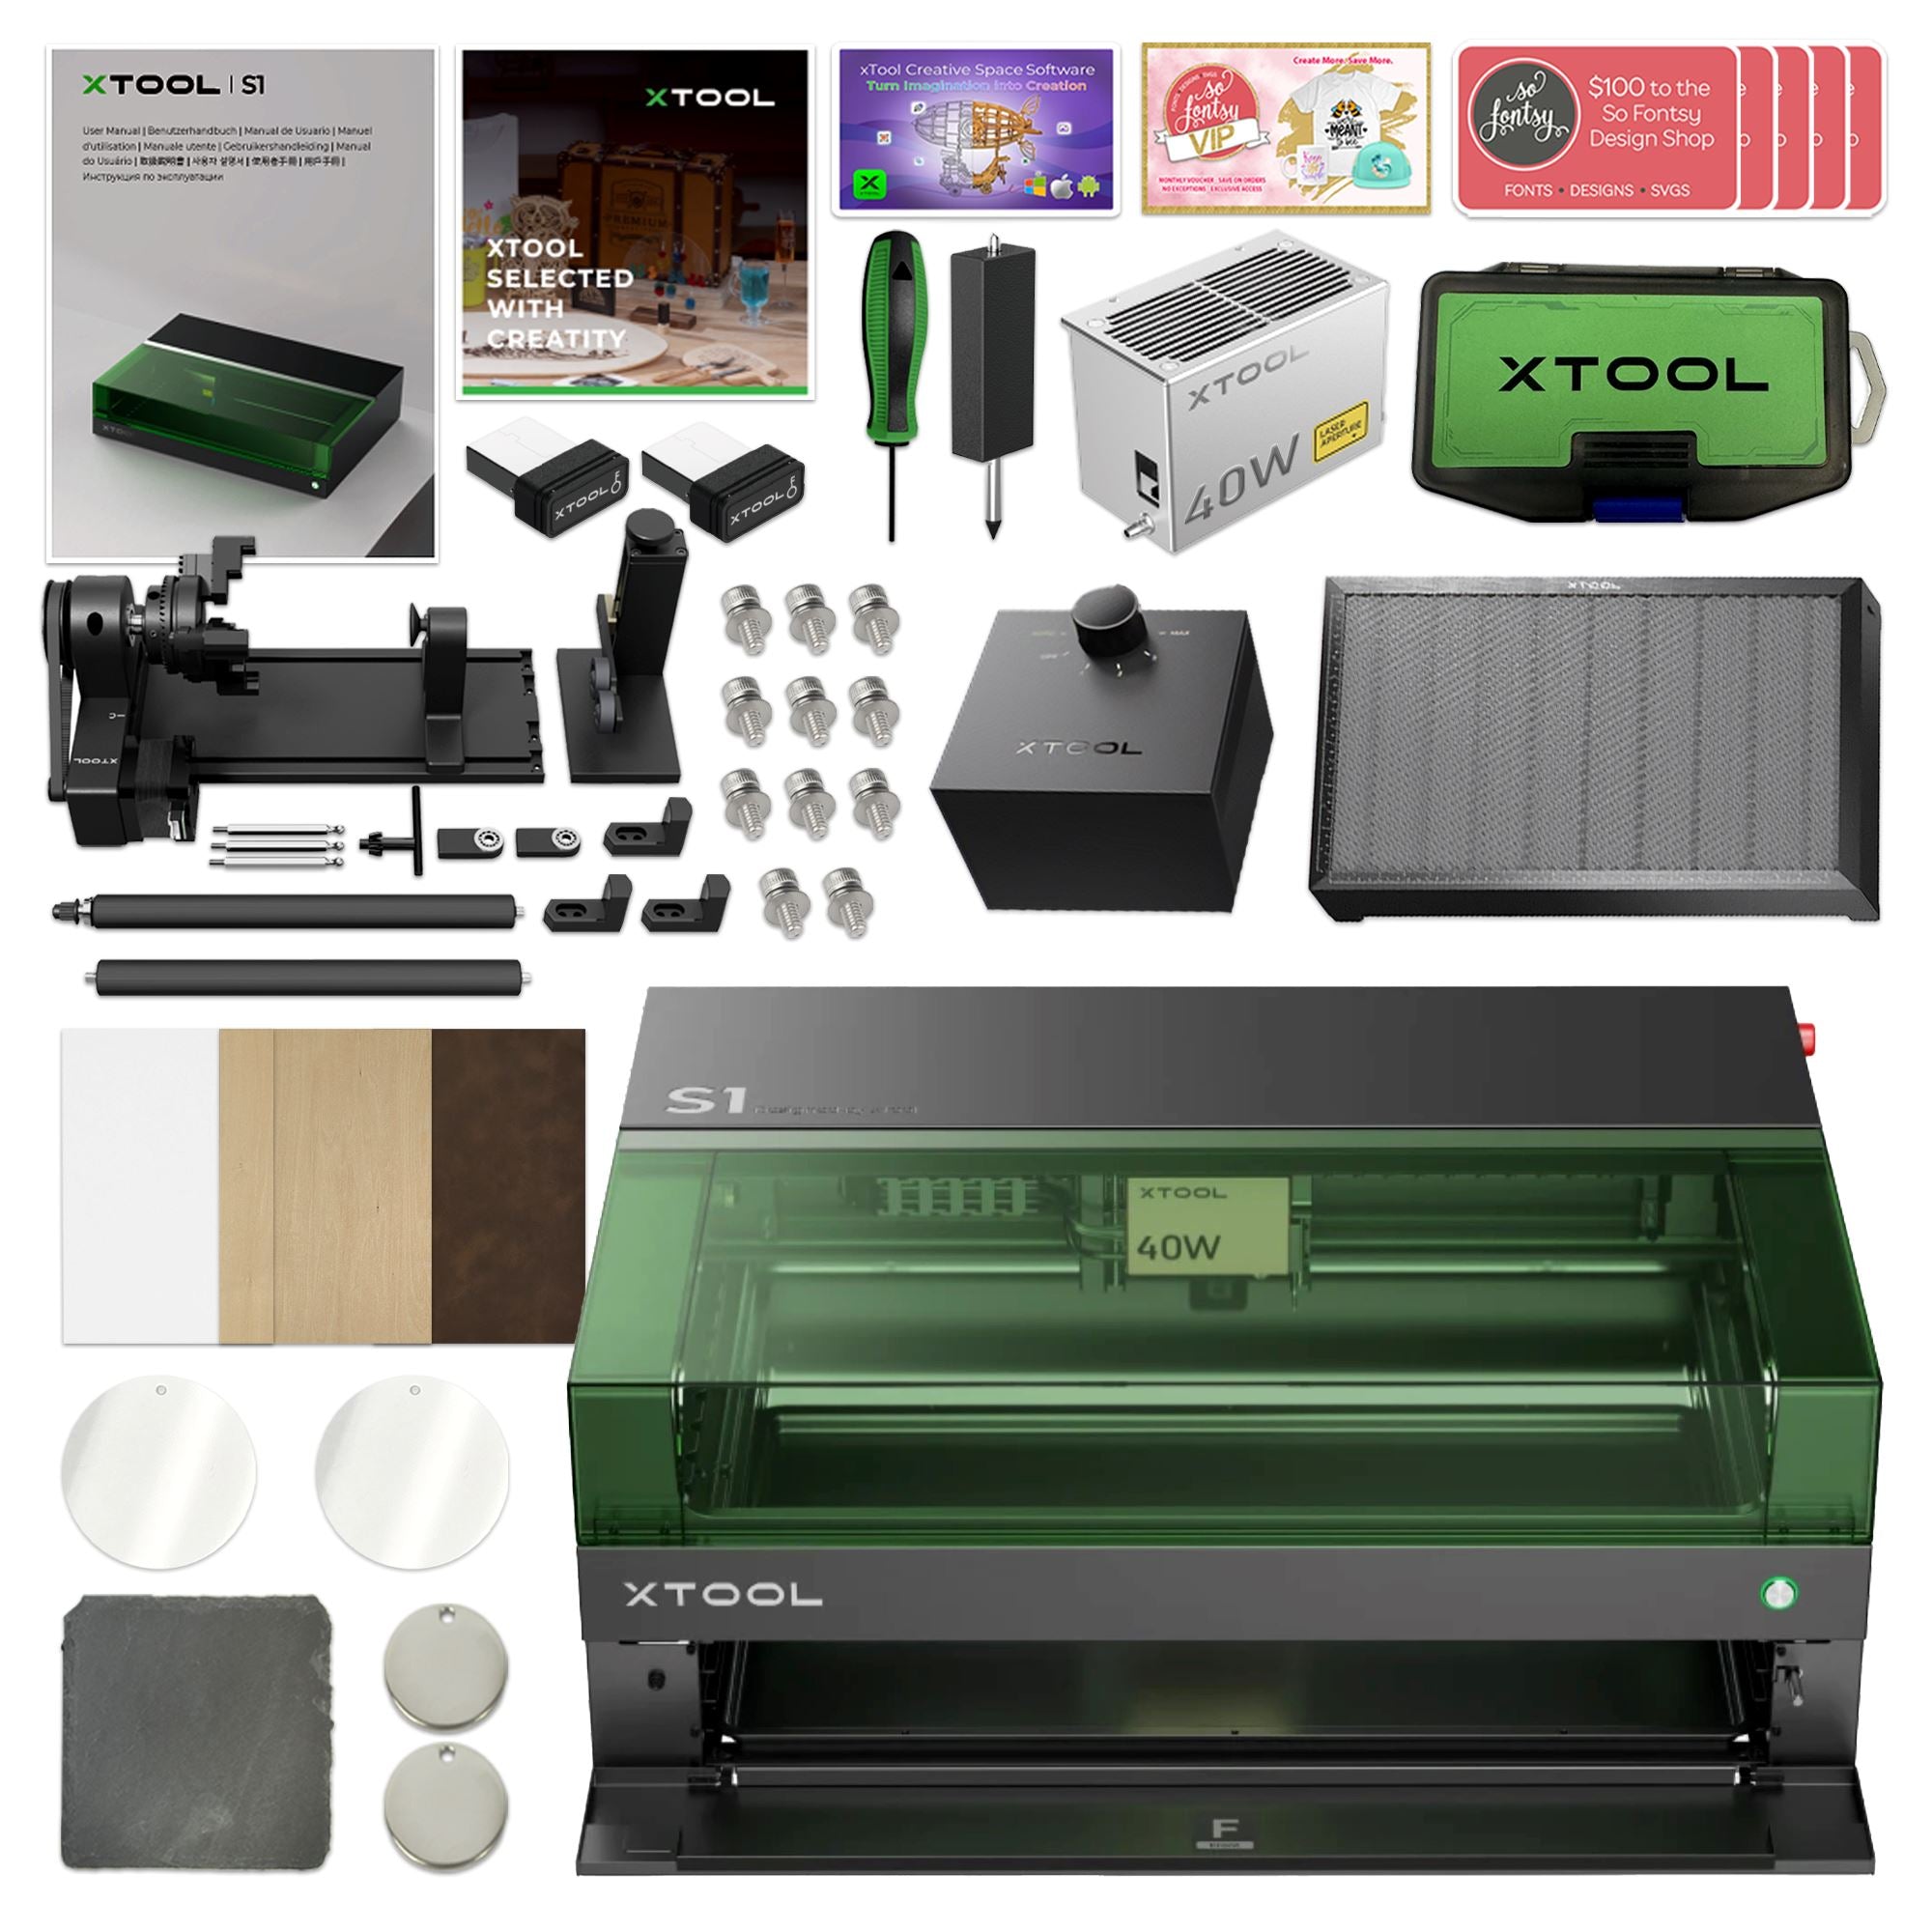 xTool S1 Laser Cutter & Engraver Machine with Screen Printing Bundle - 40W Diode Laser +$500